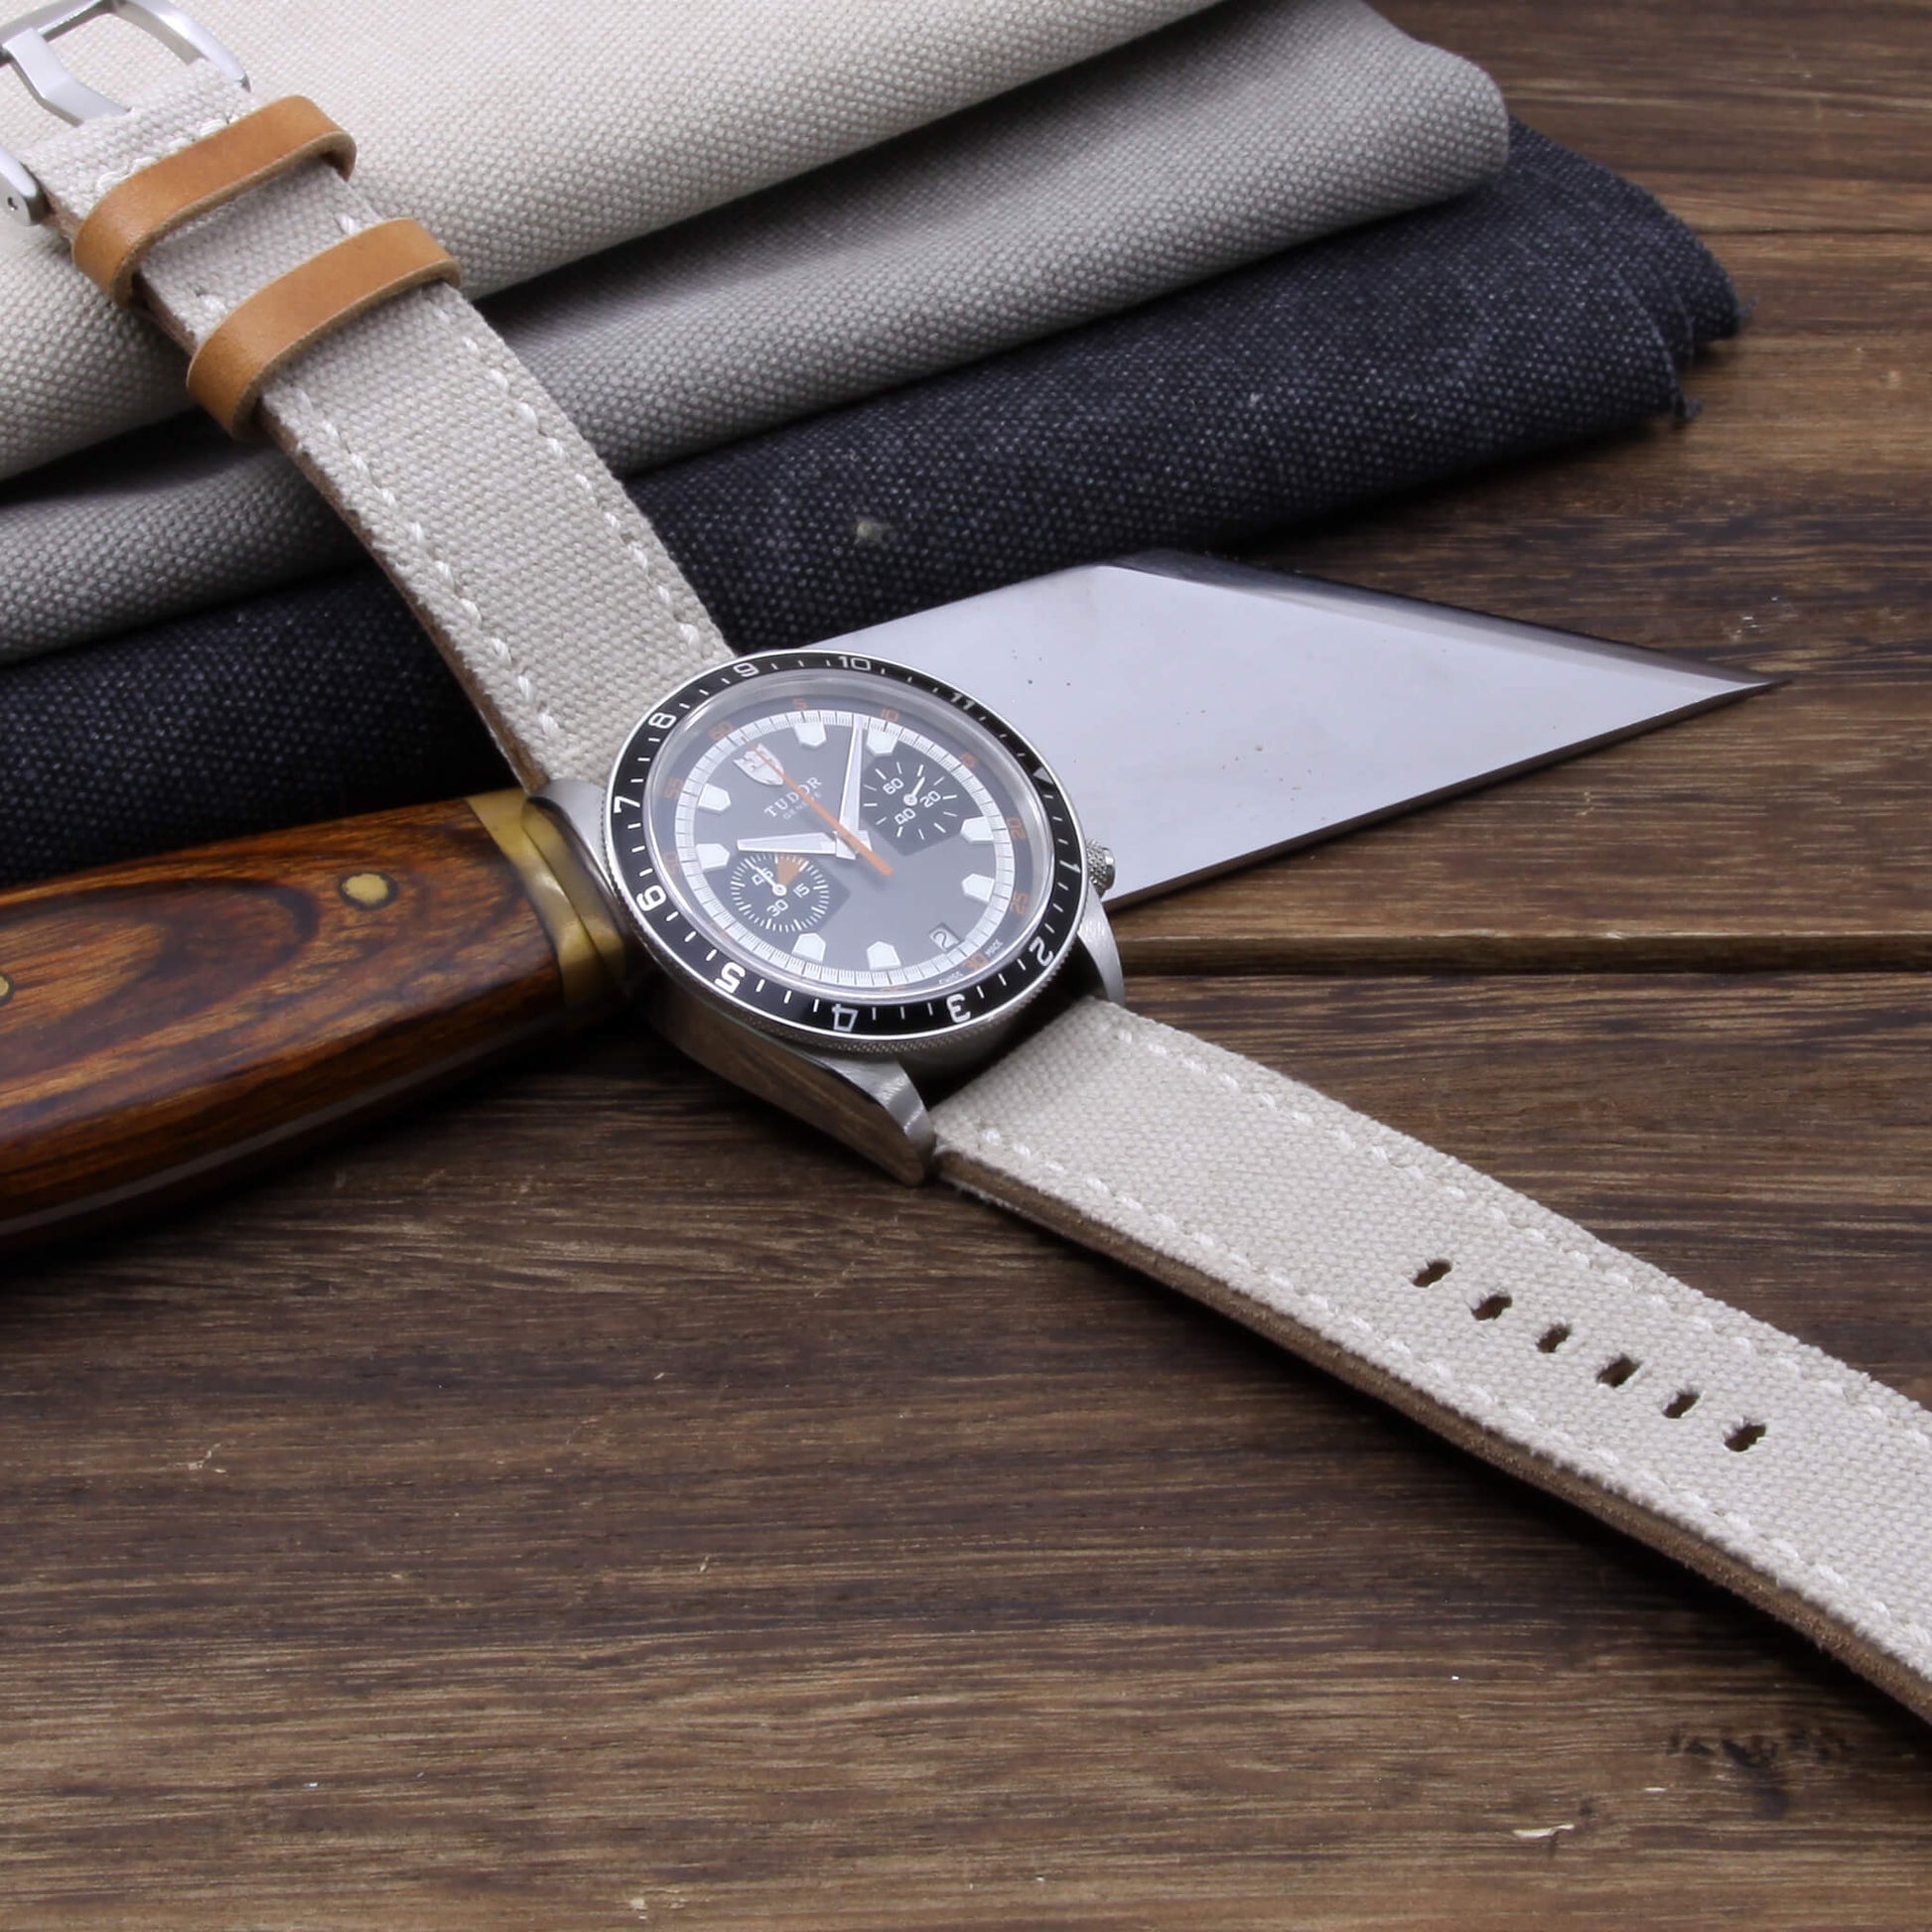 5th View of 2-Piece Full Stitch Leather Watch Strap, made with Beige Canvas and Italian veg-tanned leather lining, handcrafted by Cozy Handmade